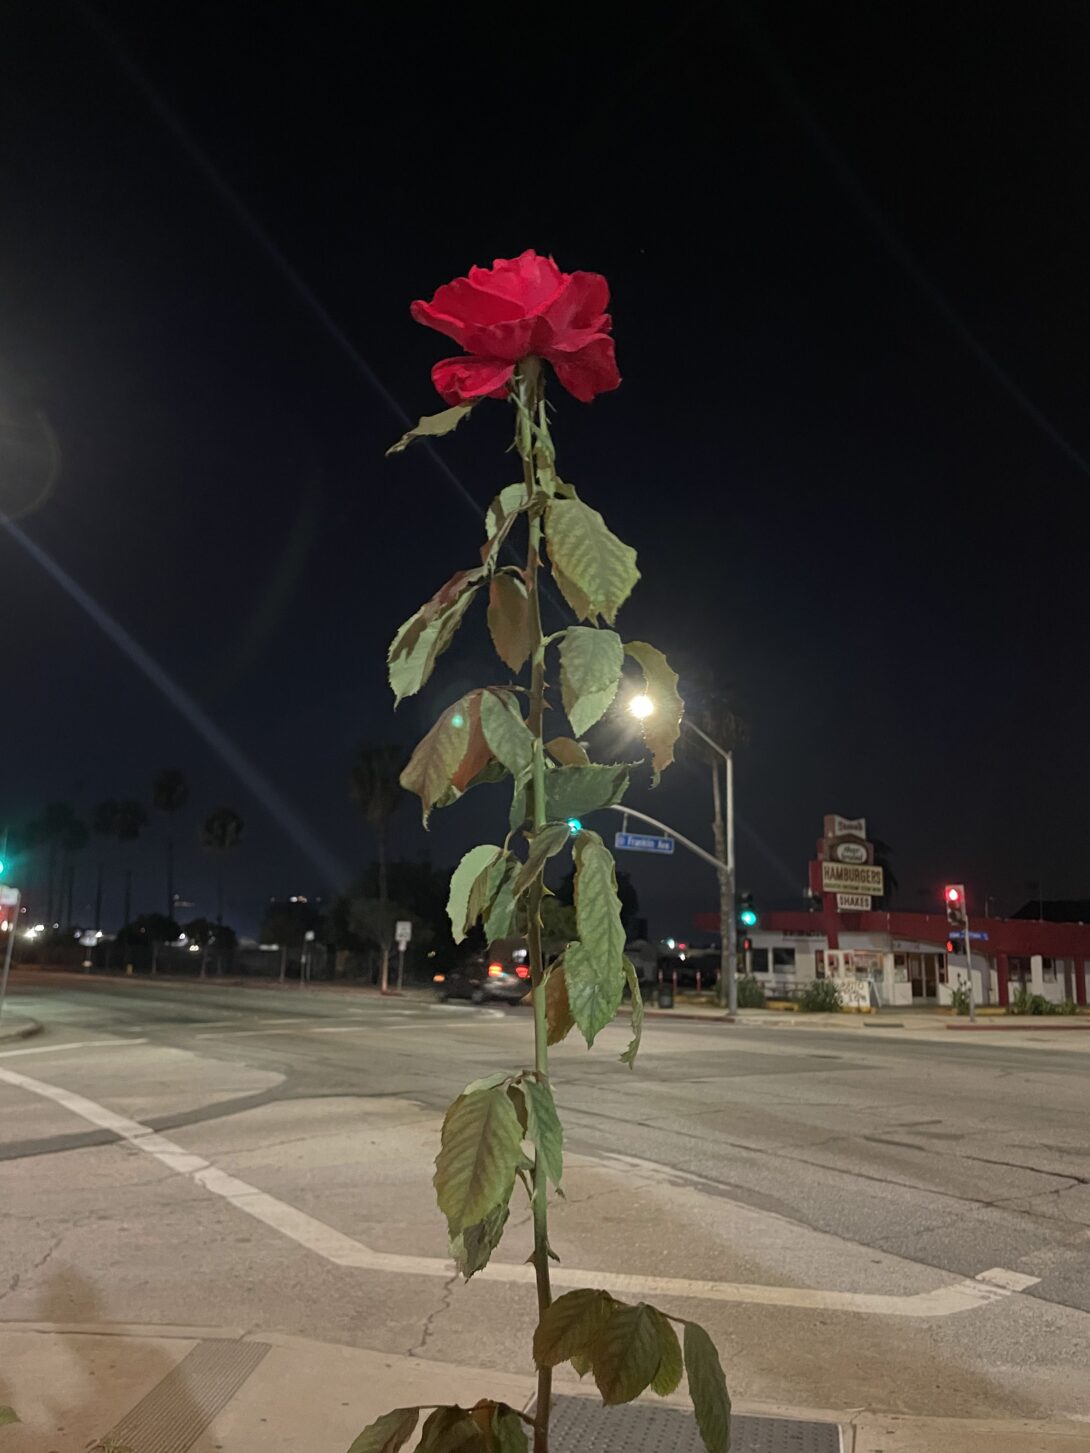 A red rose with a tall stem, studded with lots of dark green leaves and thorns, illuminated by a streetlight against a night sky. The rose is growing on the corner of an empty gray and white street intersection lined with silhouettes of palm trees. Across the intersection is a red-roofed white restaurant with a sign that reads “HAMBURGERS”.